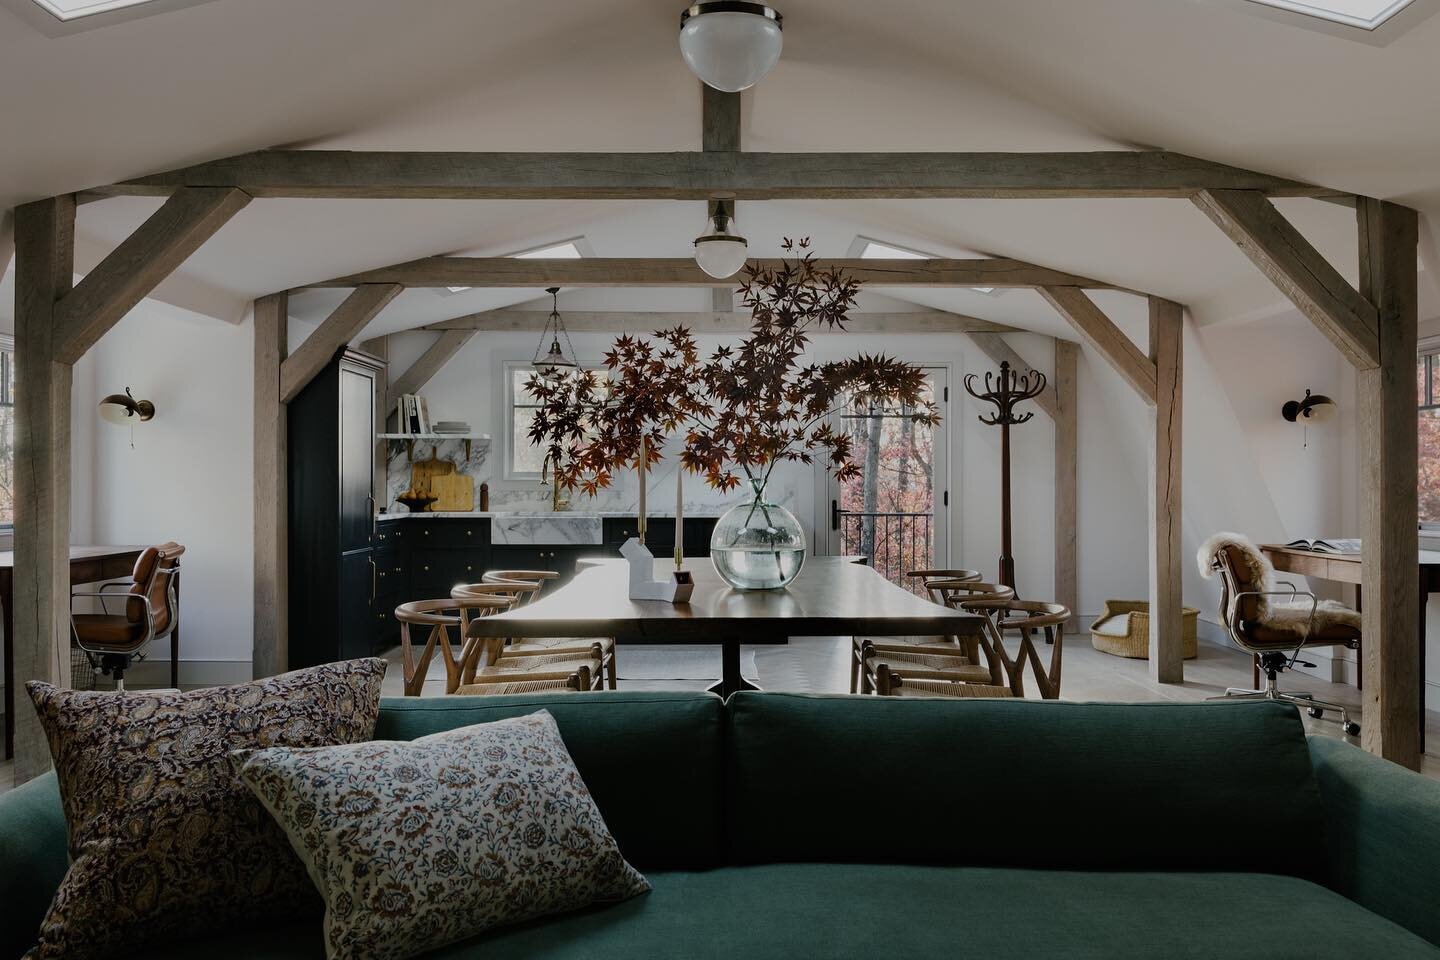 A 100-year-old upstate New York barn transformed into the coziest home office by the incredibly talented @tessinteriors as featured on @getclever this week 💫

Designer Tess Twiehaus and her team took a space that felt abandoned and gave it a new pur